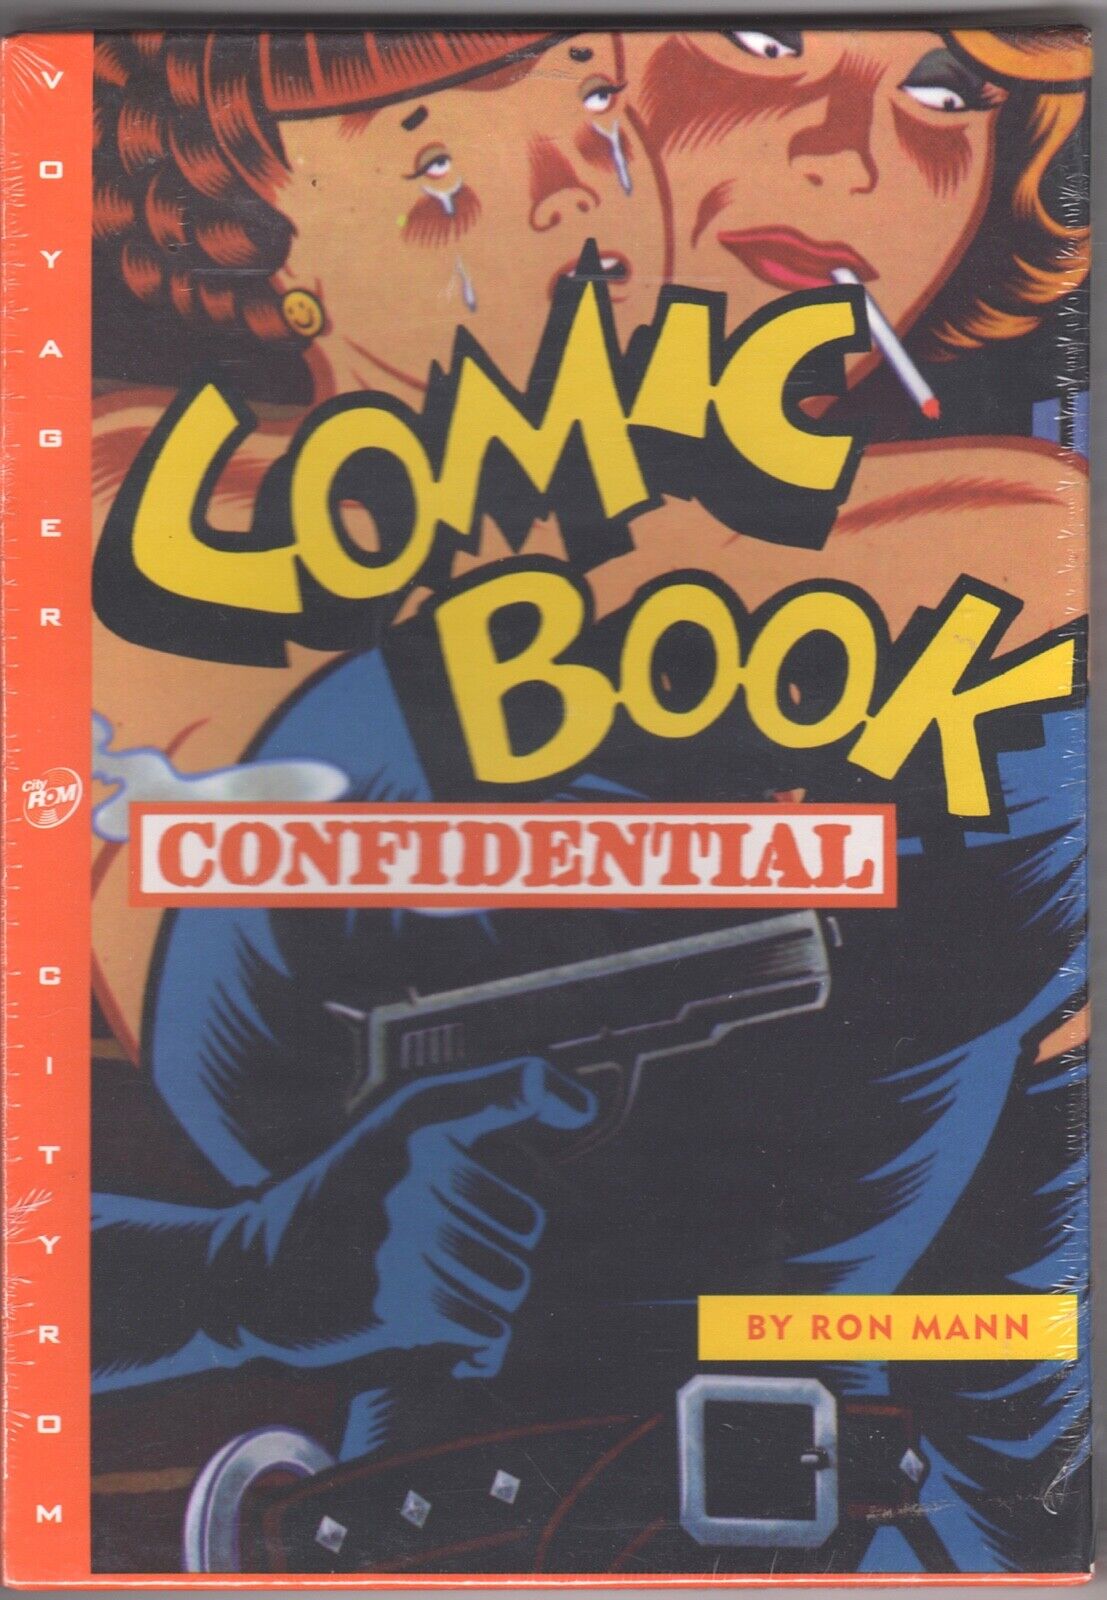 Comic Book Confidential Ron Mann Voyager Vintage MAC CD-ROM Brand New